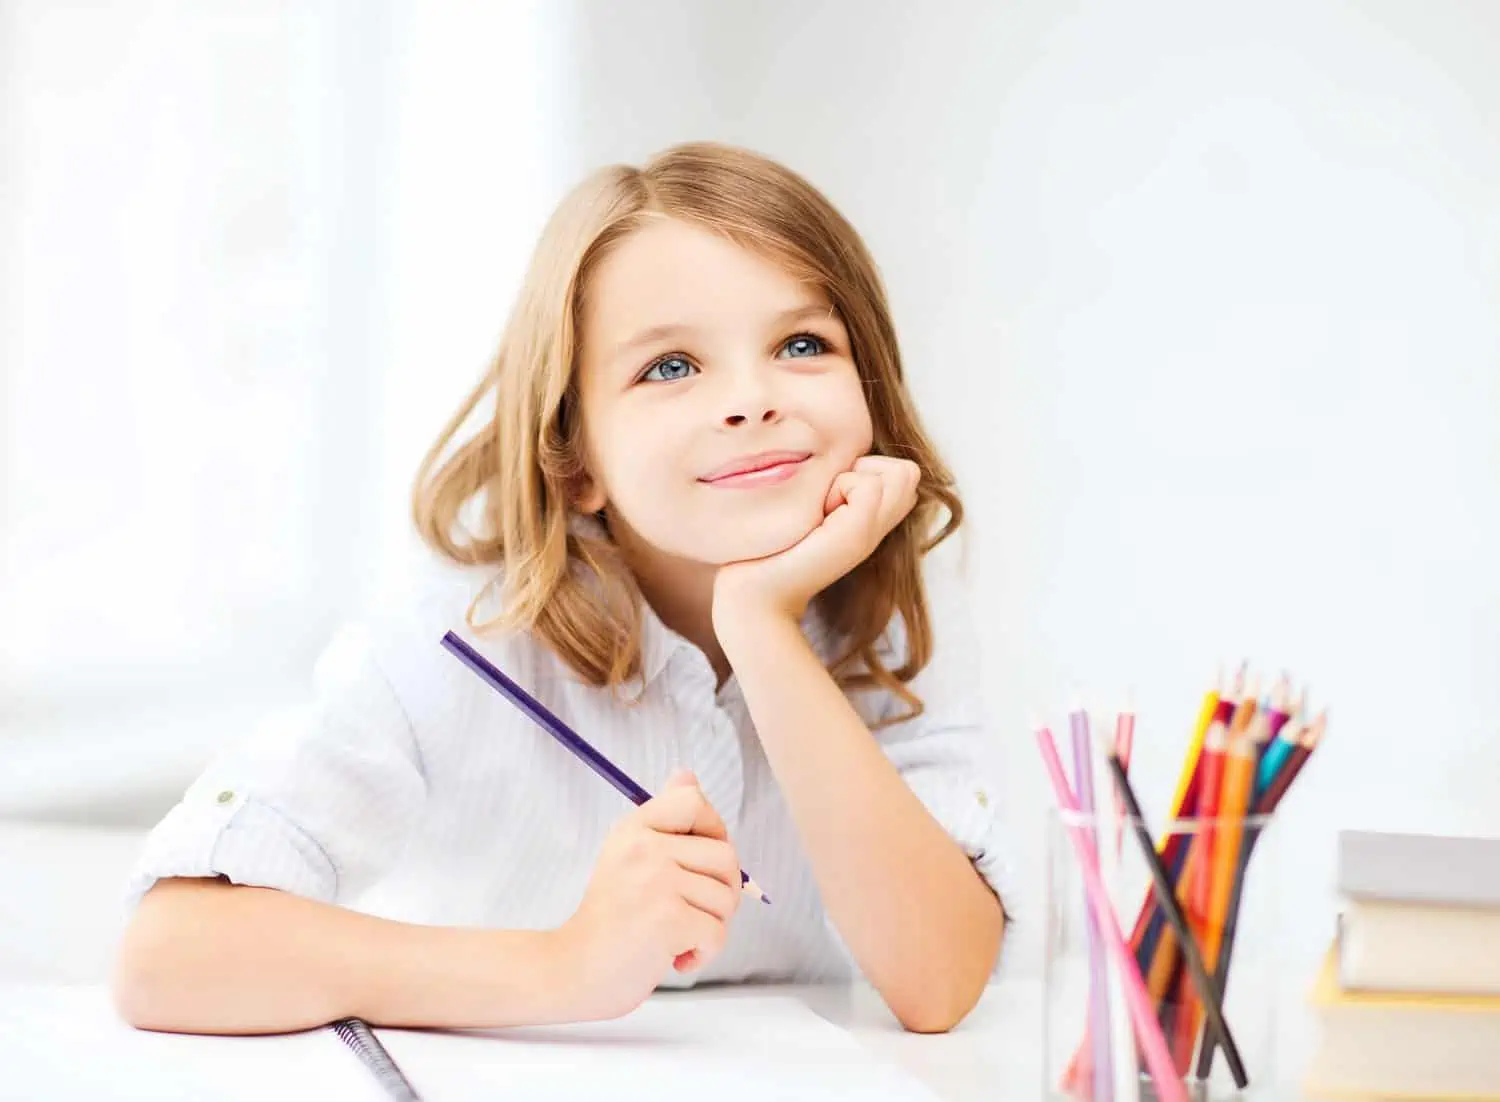 Little girl holding a coloring pen